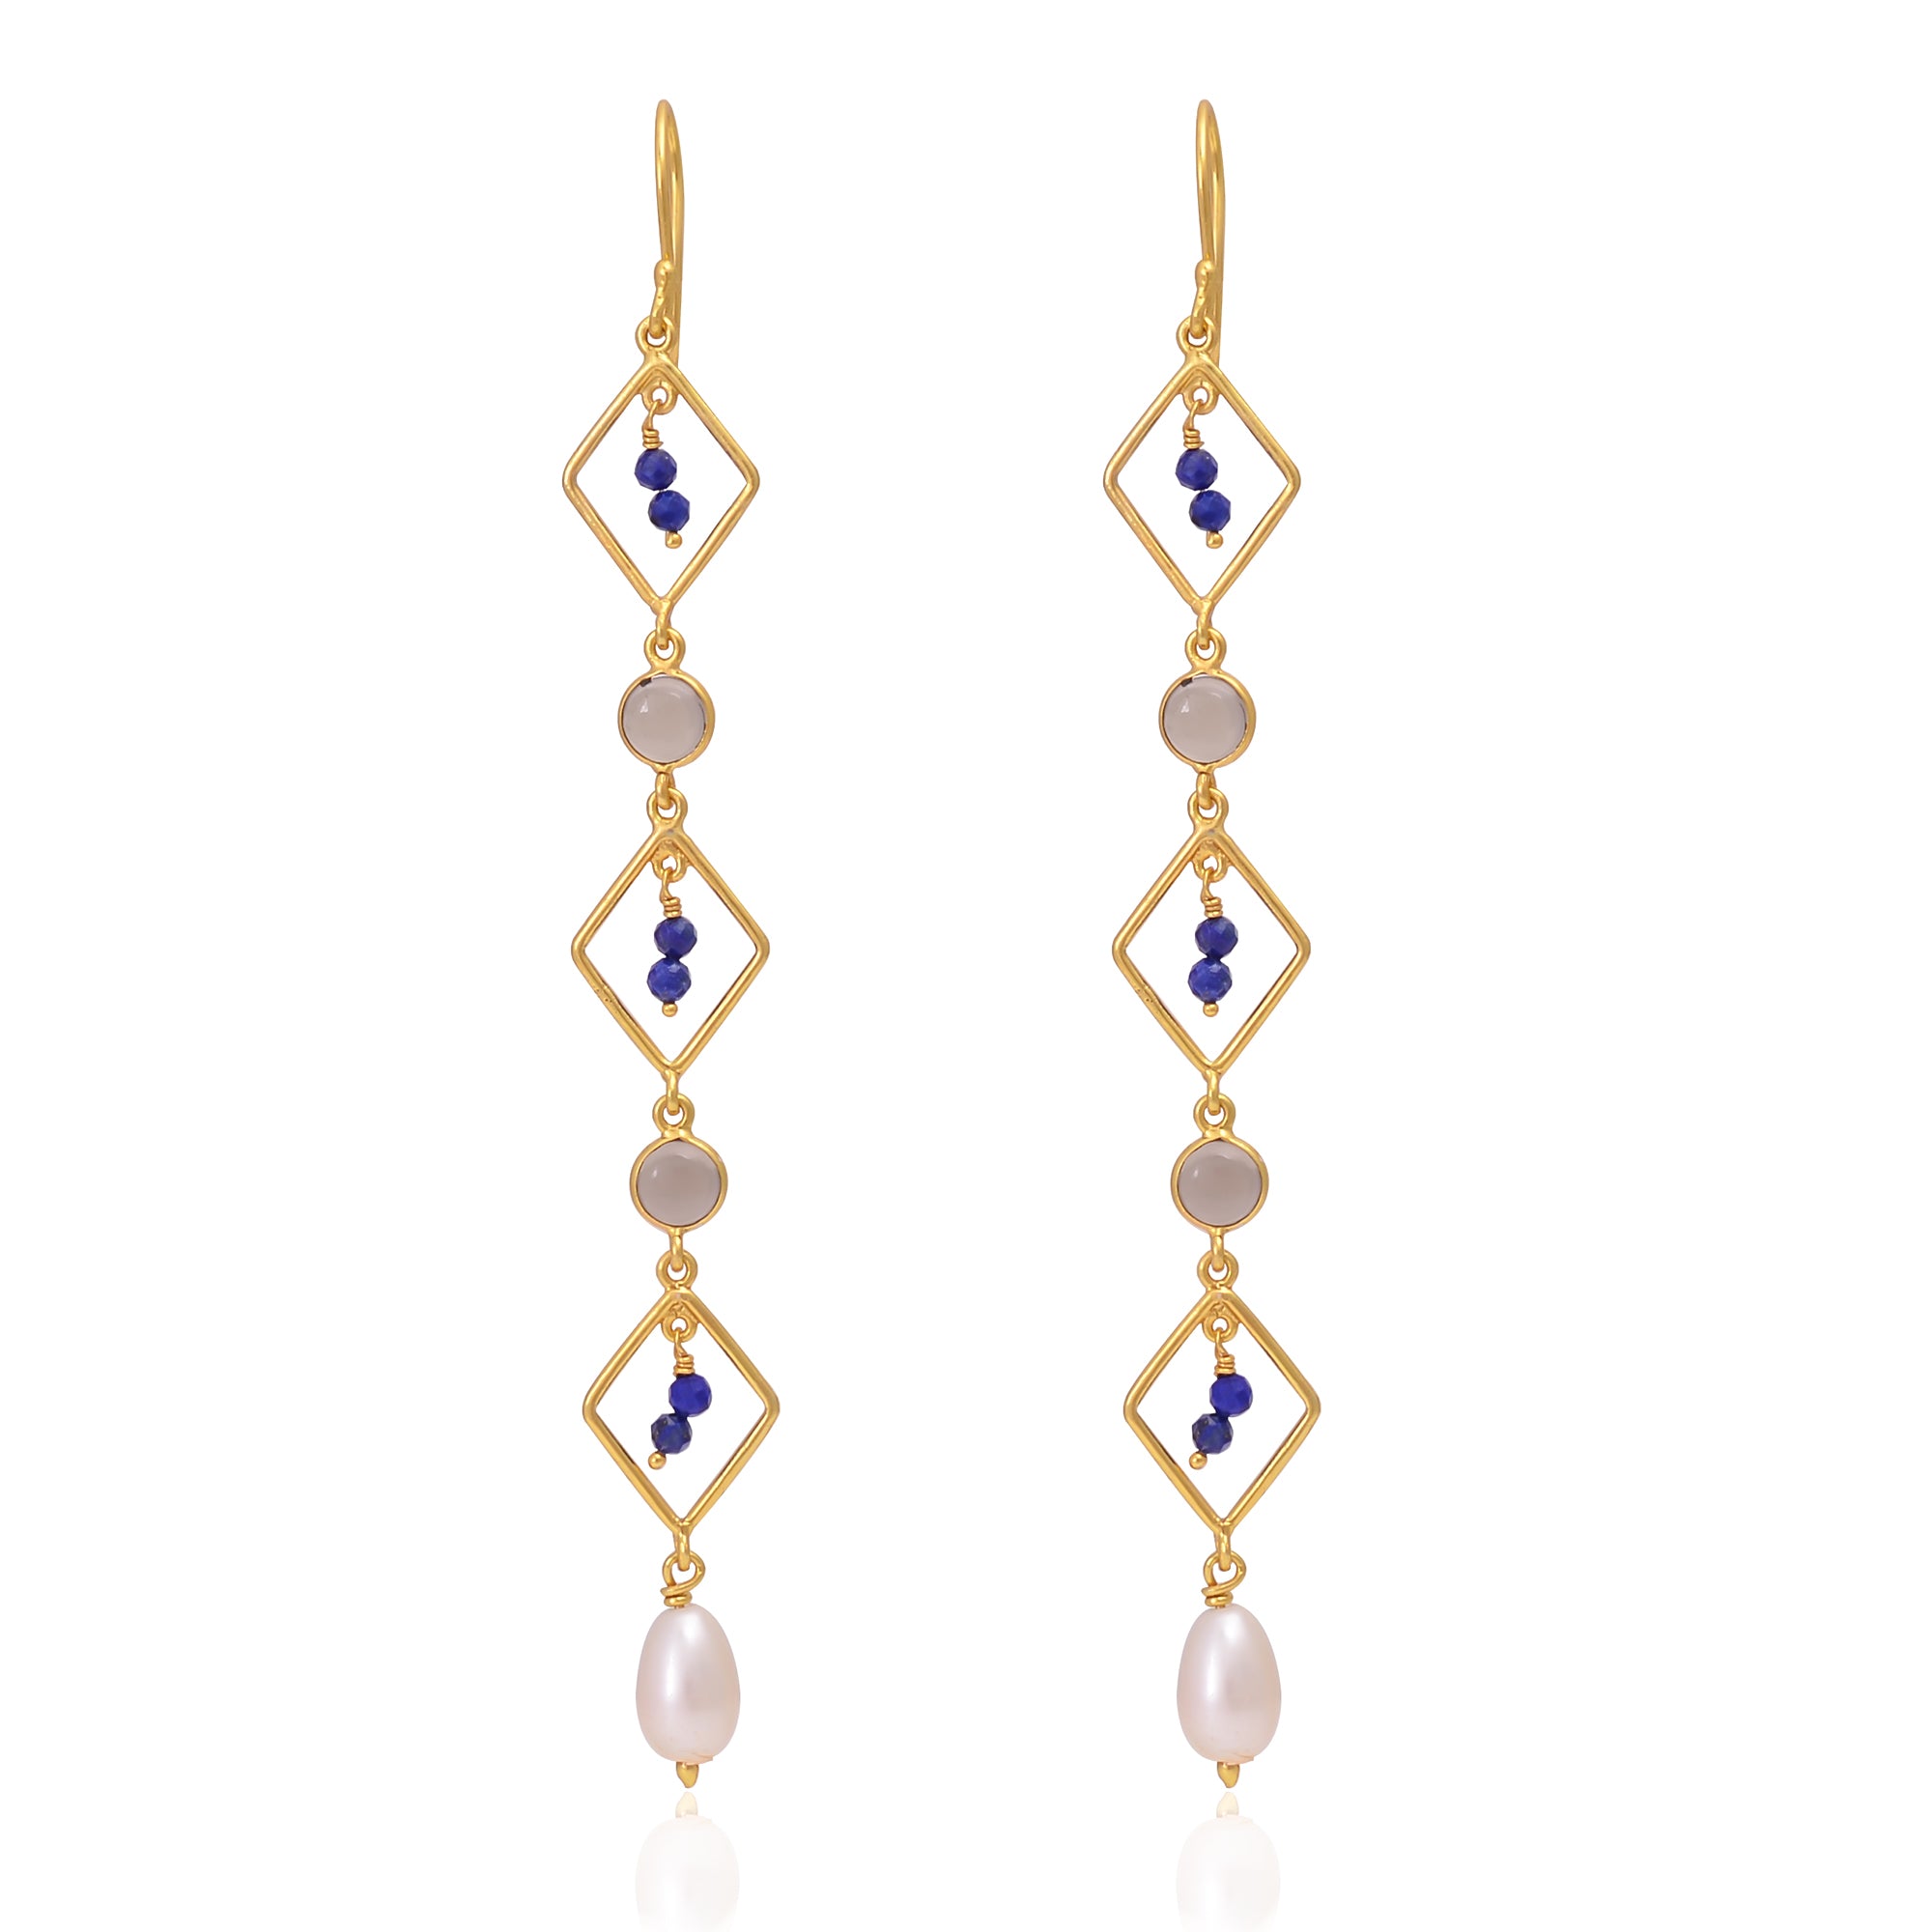 Silver Gold Plated Blue Lapis, Smoky Quartz and Pearl Earring